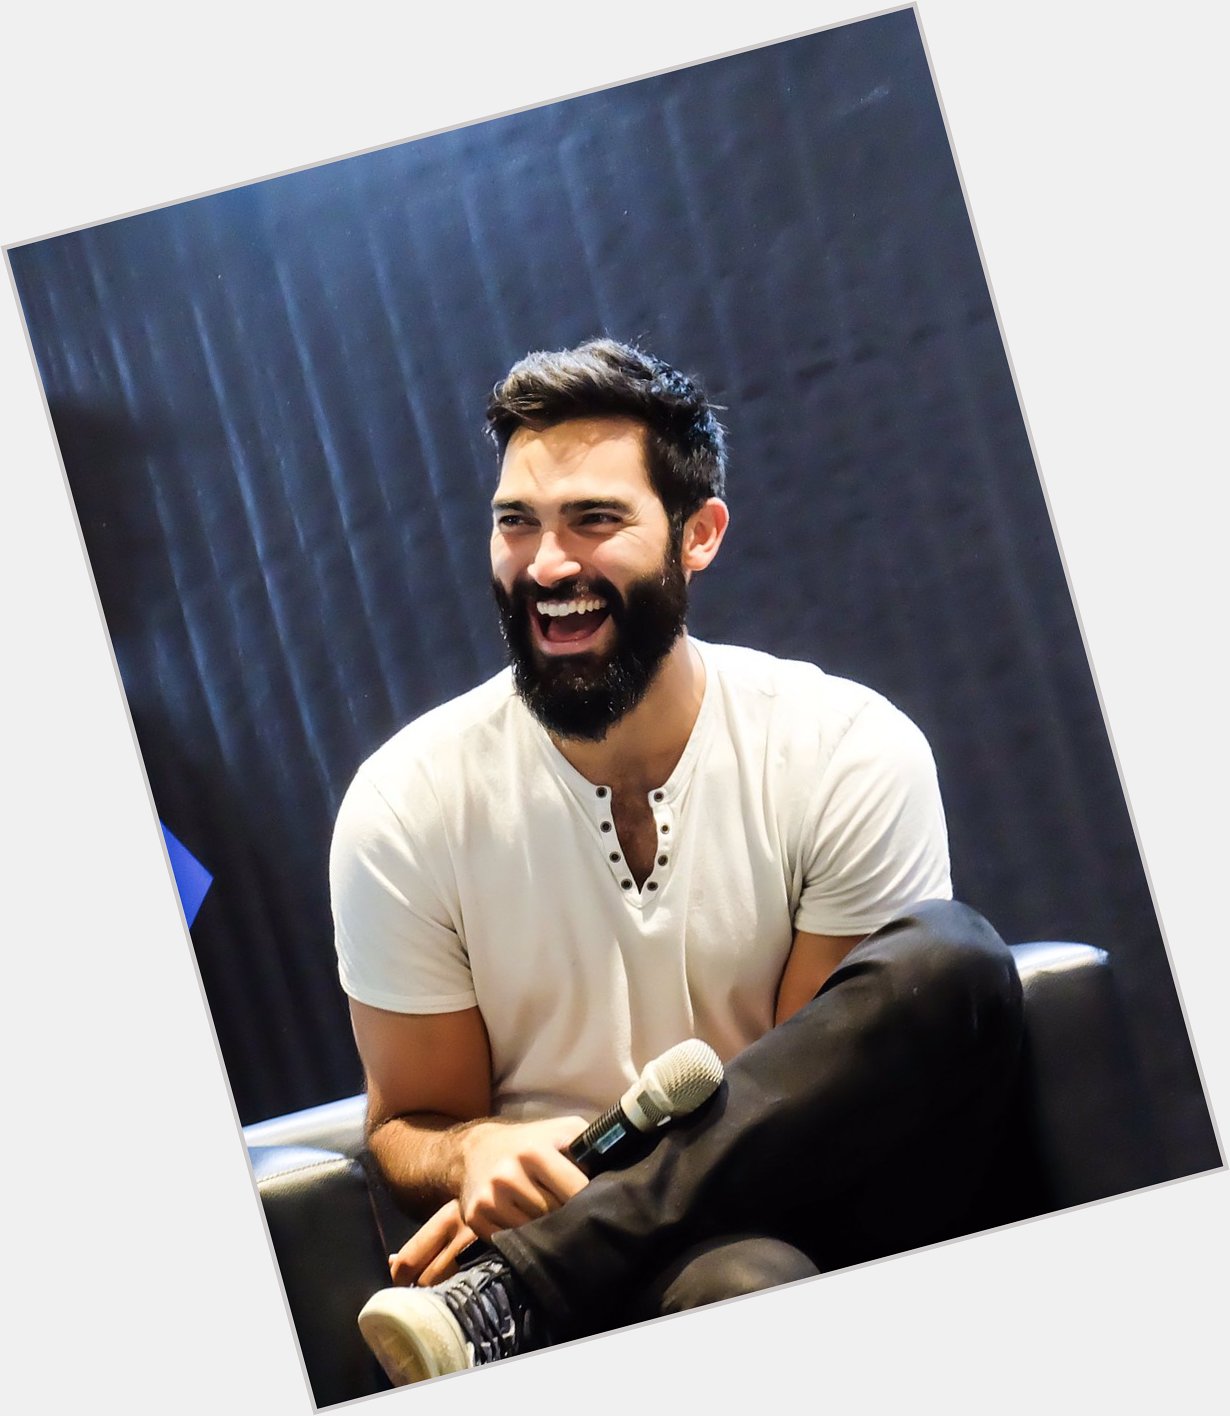 Happy birthday, Tyler Hoechlin! You mean the world to me, I love you so much!  